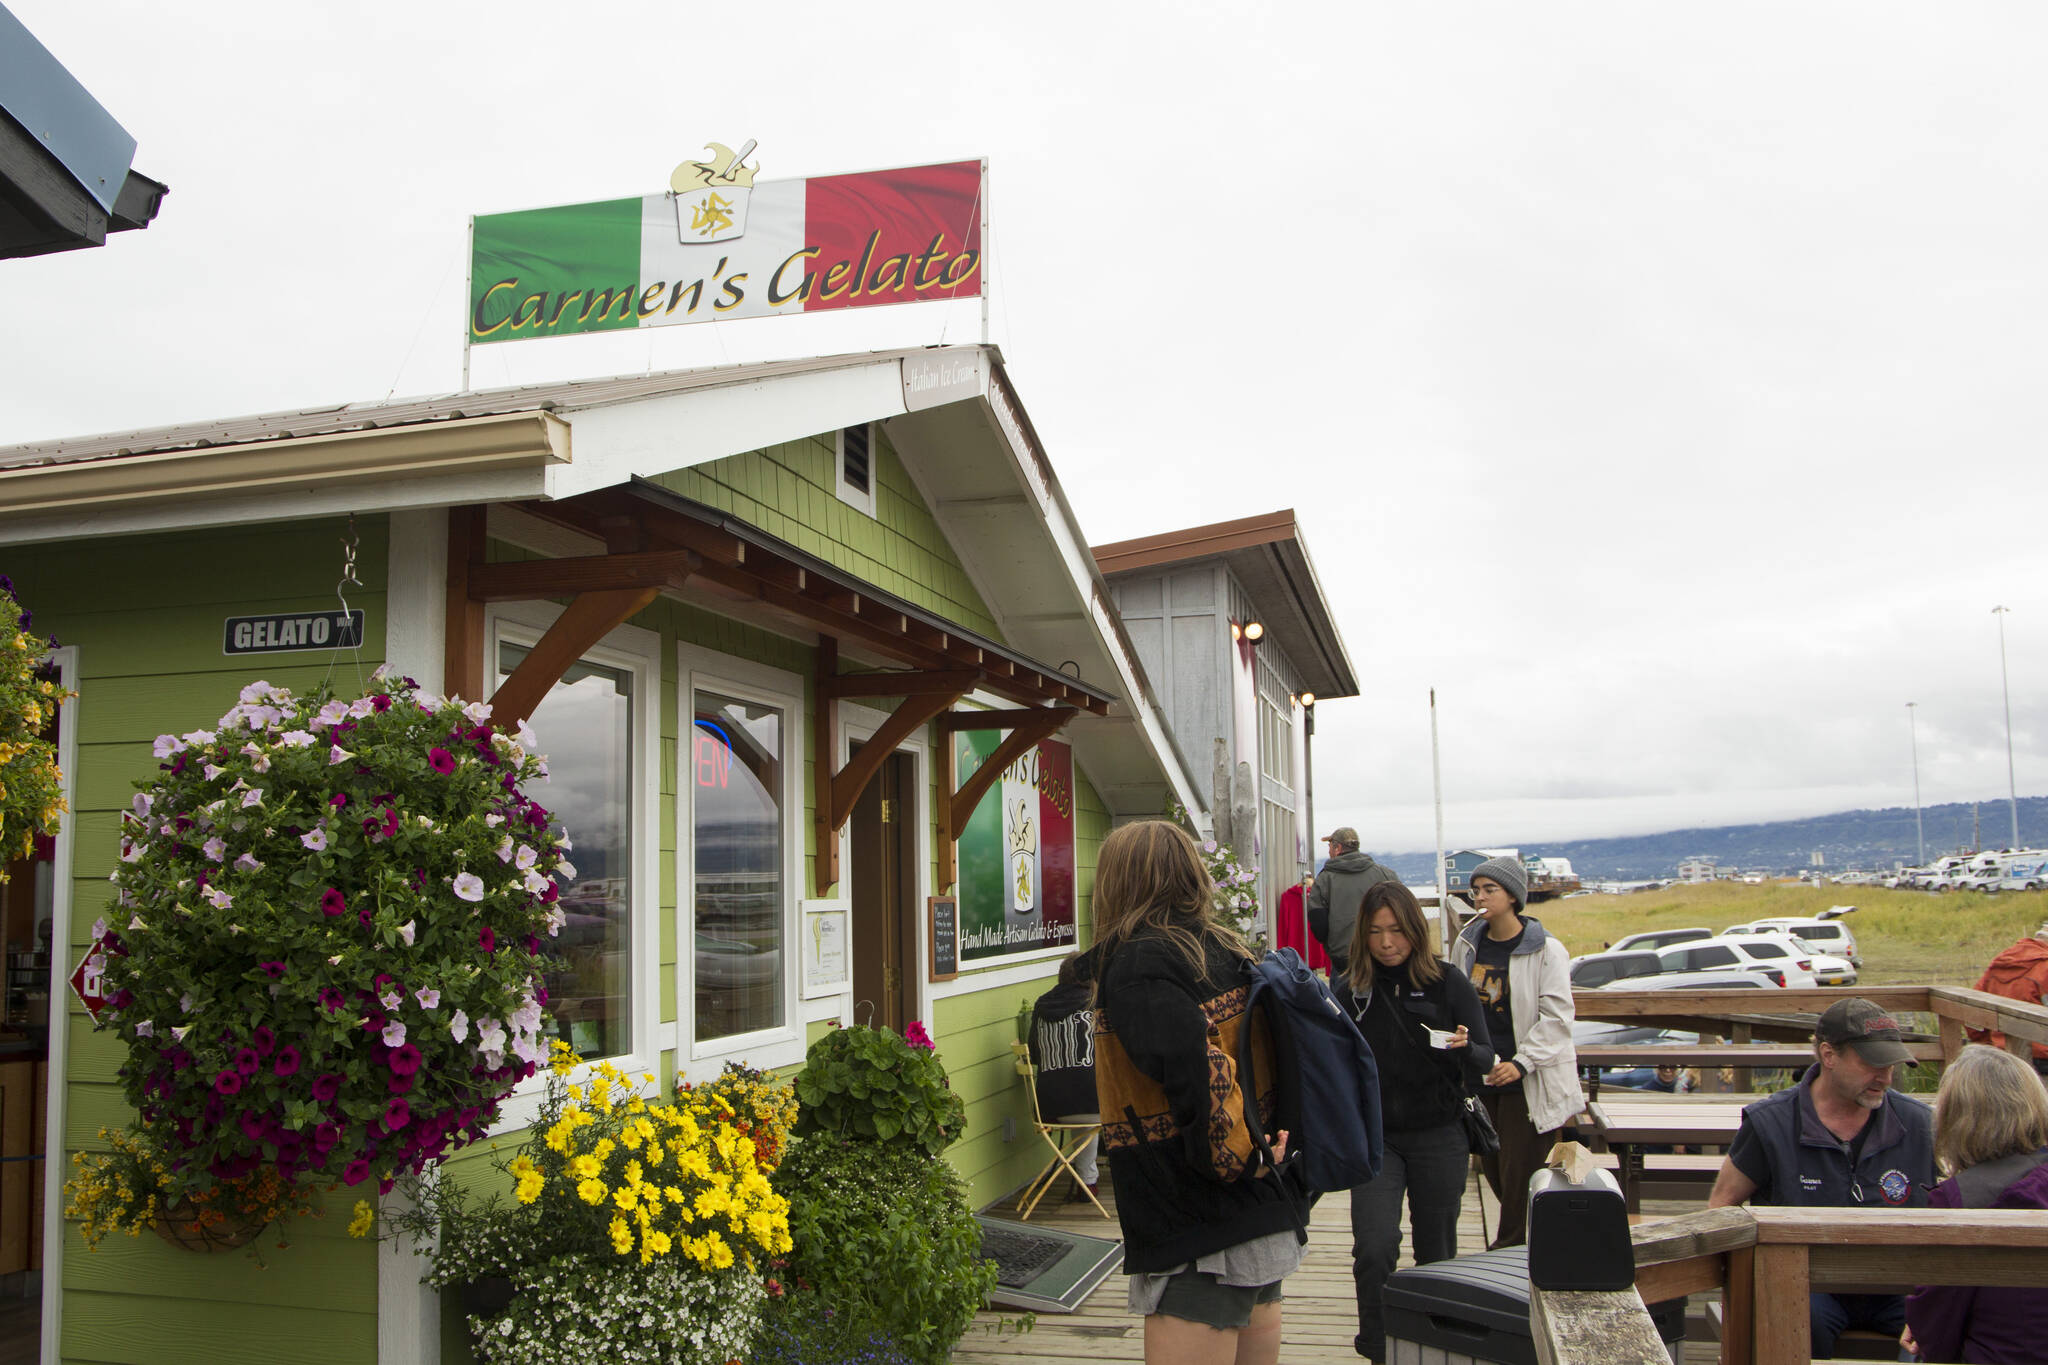 Carmen's Gelato is full of customers before their closing on Labor Day. (Photo by Sarah Knapp/Homer News)